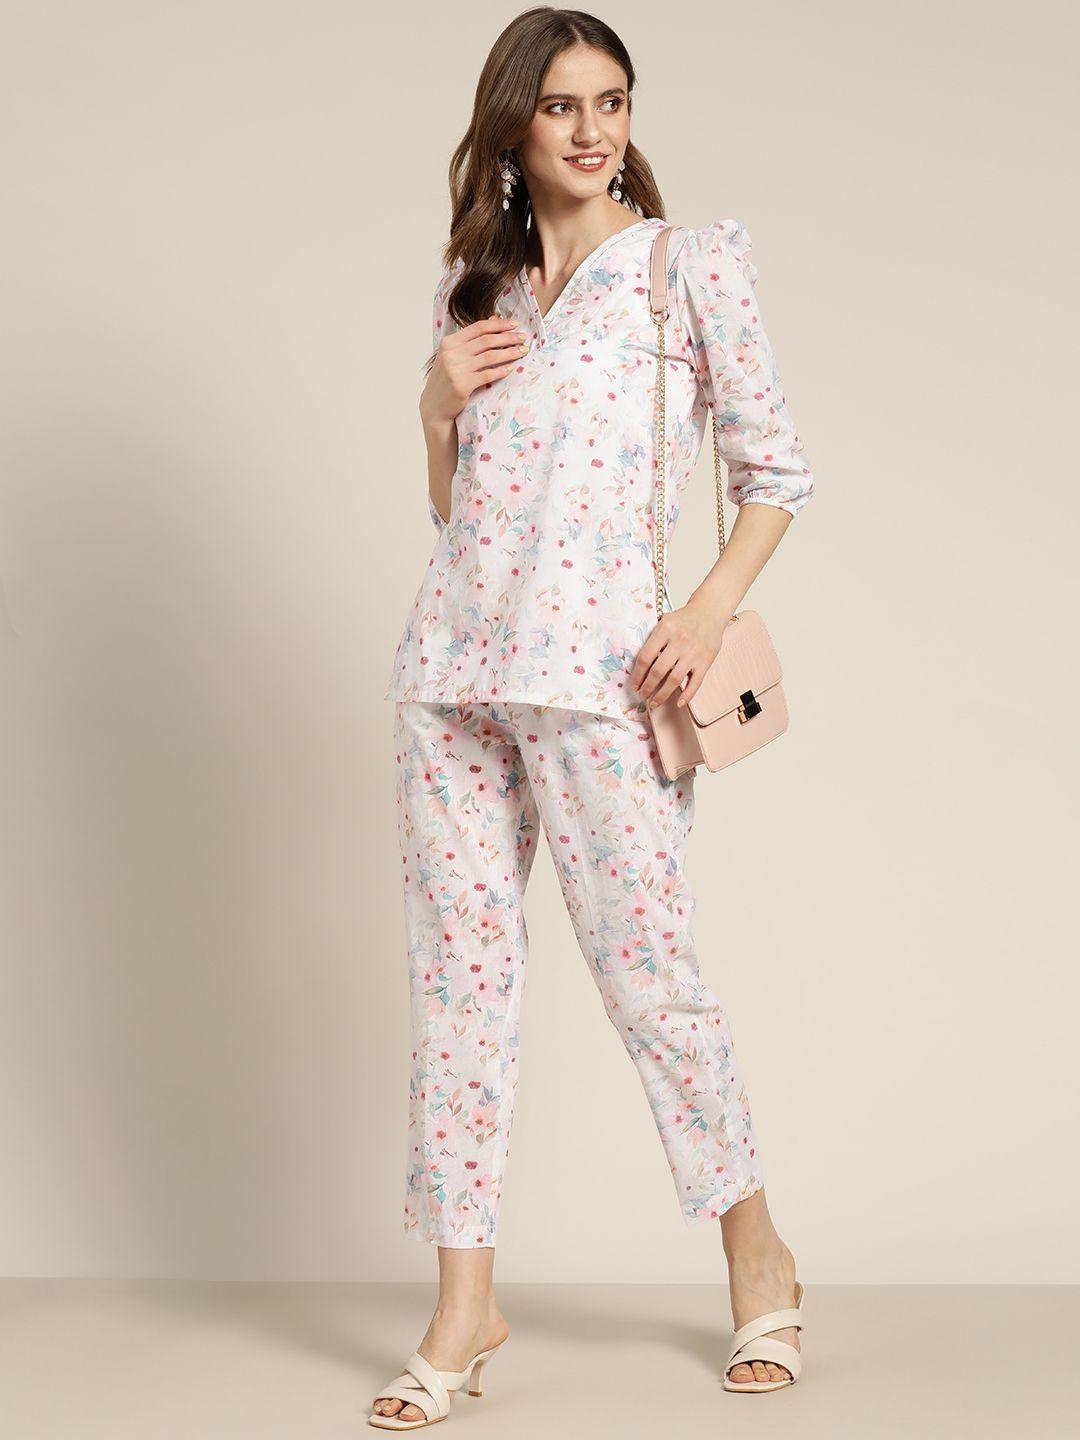 shae-by-sassafras-women-white-floral-printed-trousers